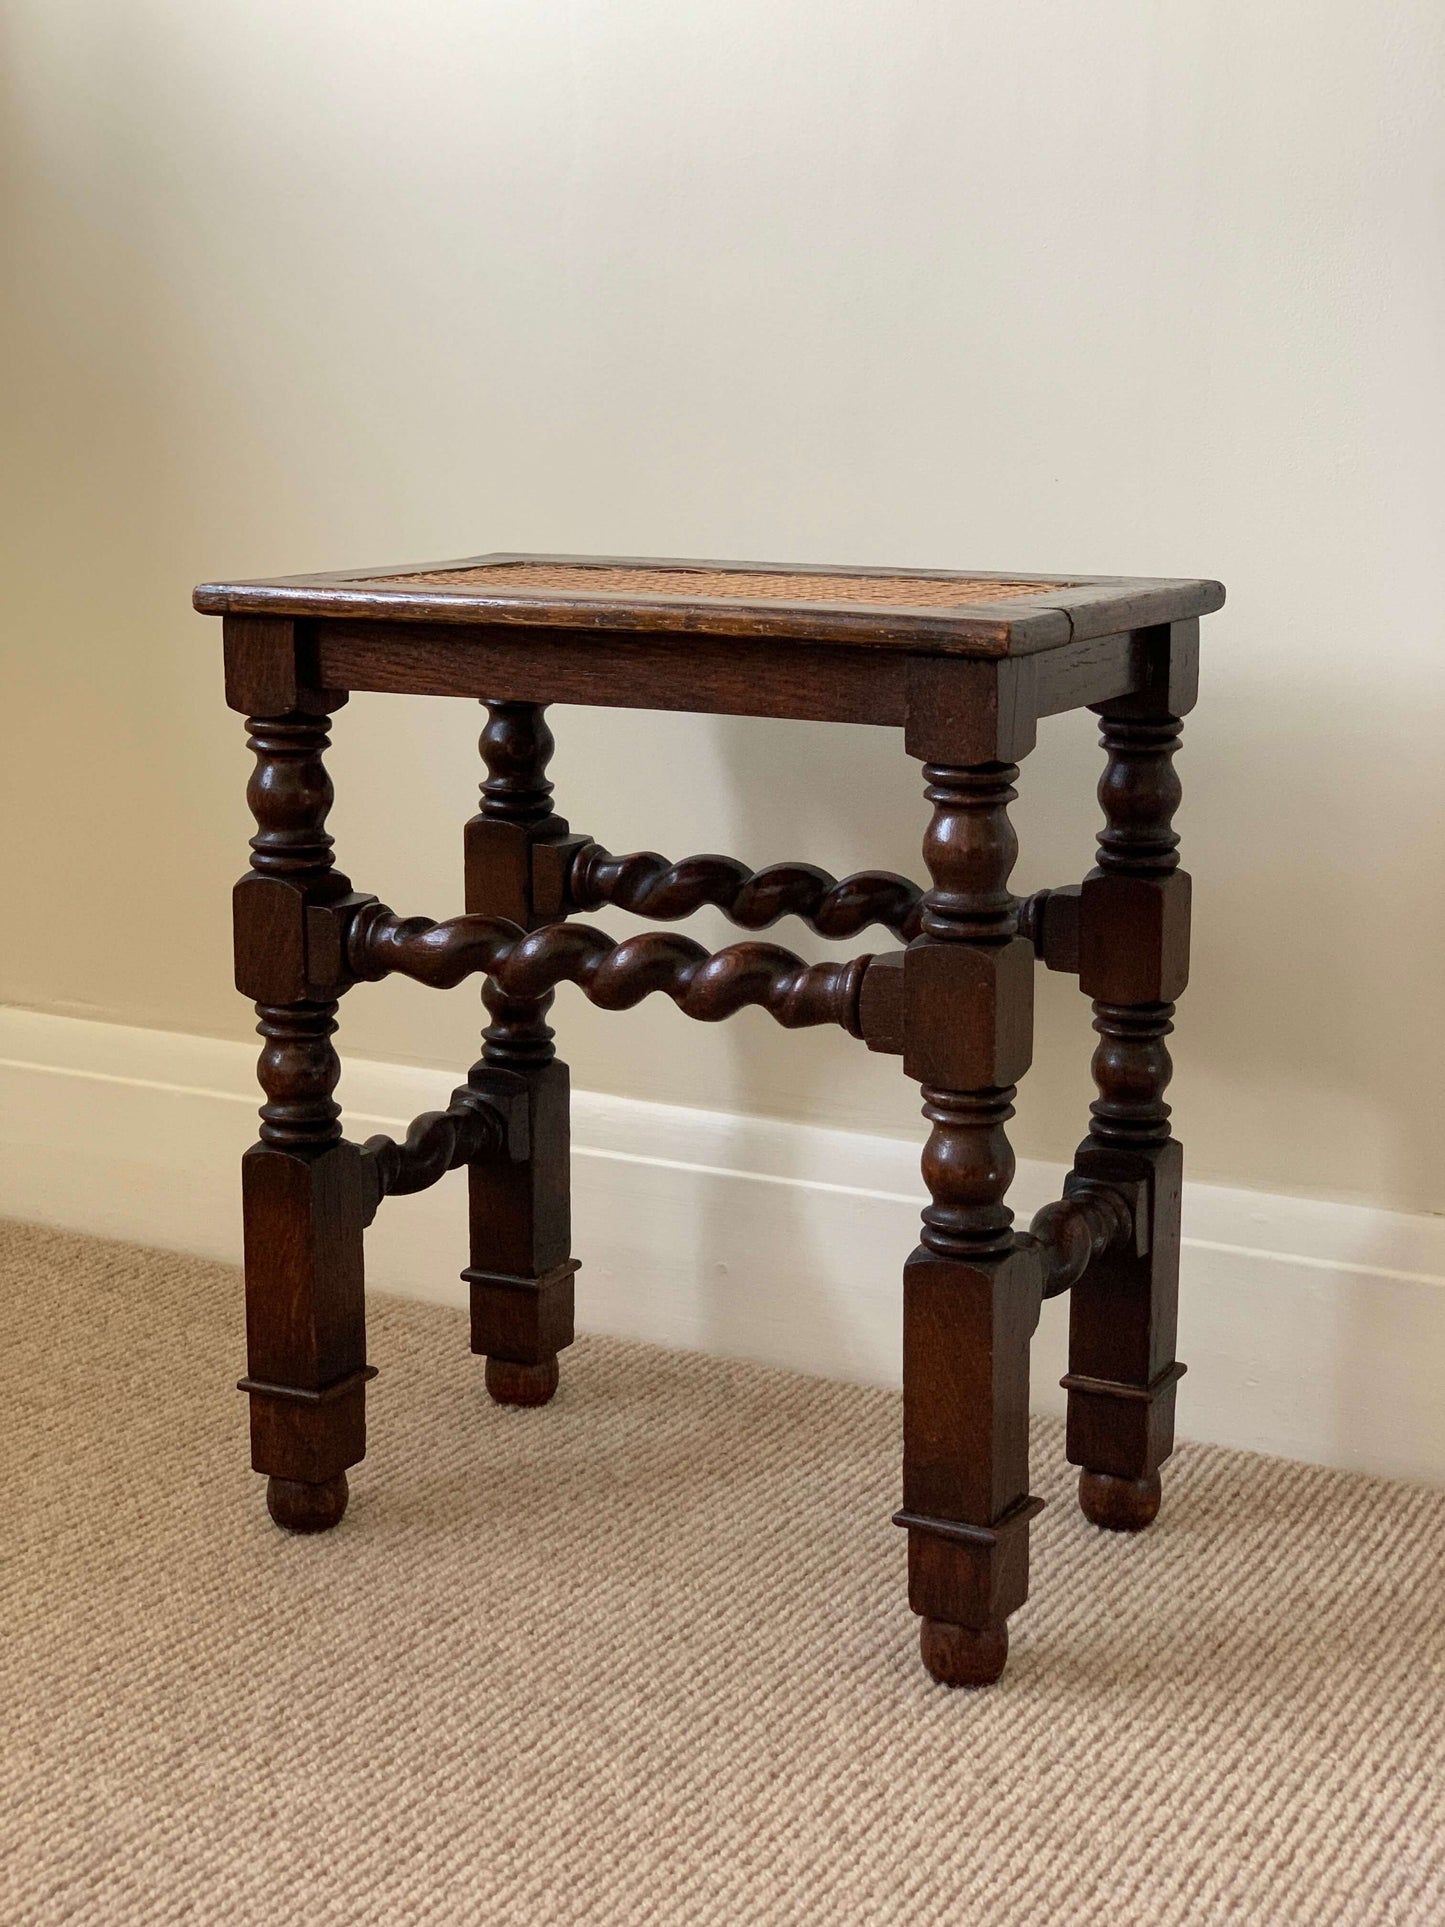 Antique cane stool with twisted detailing